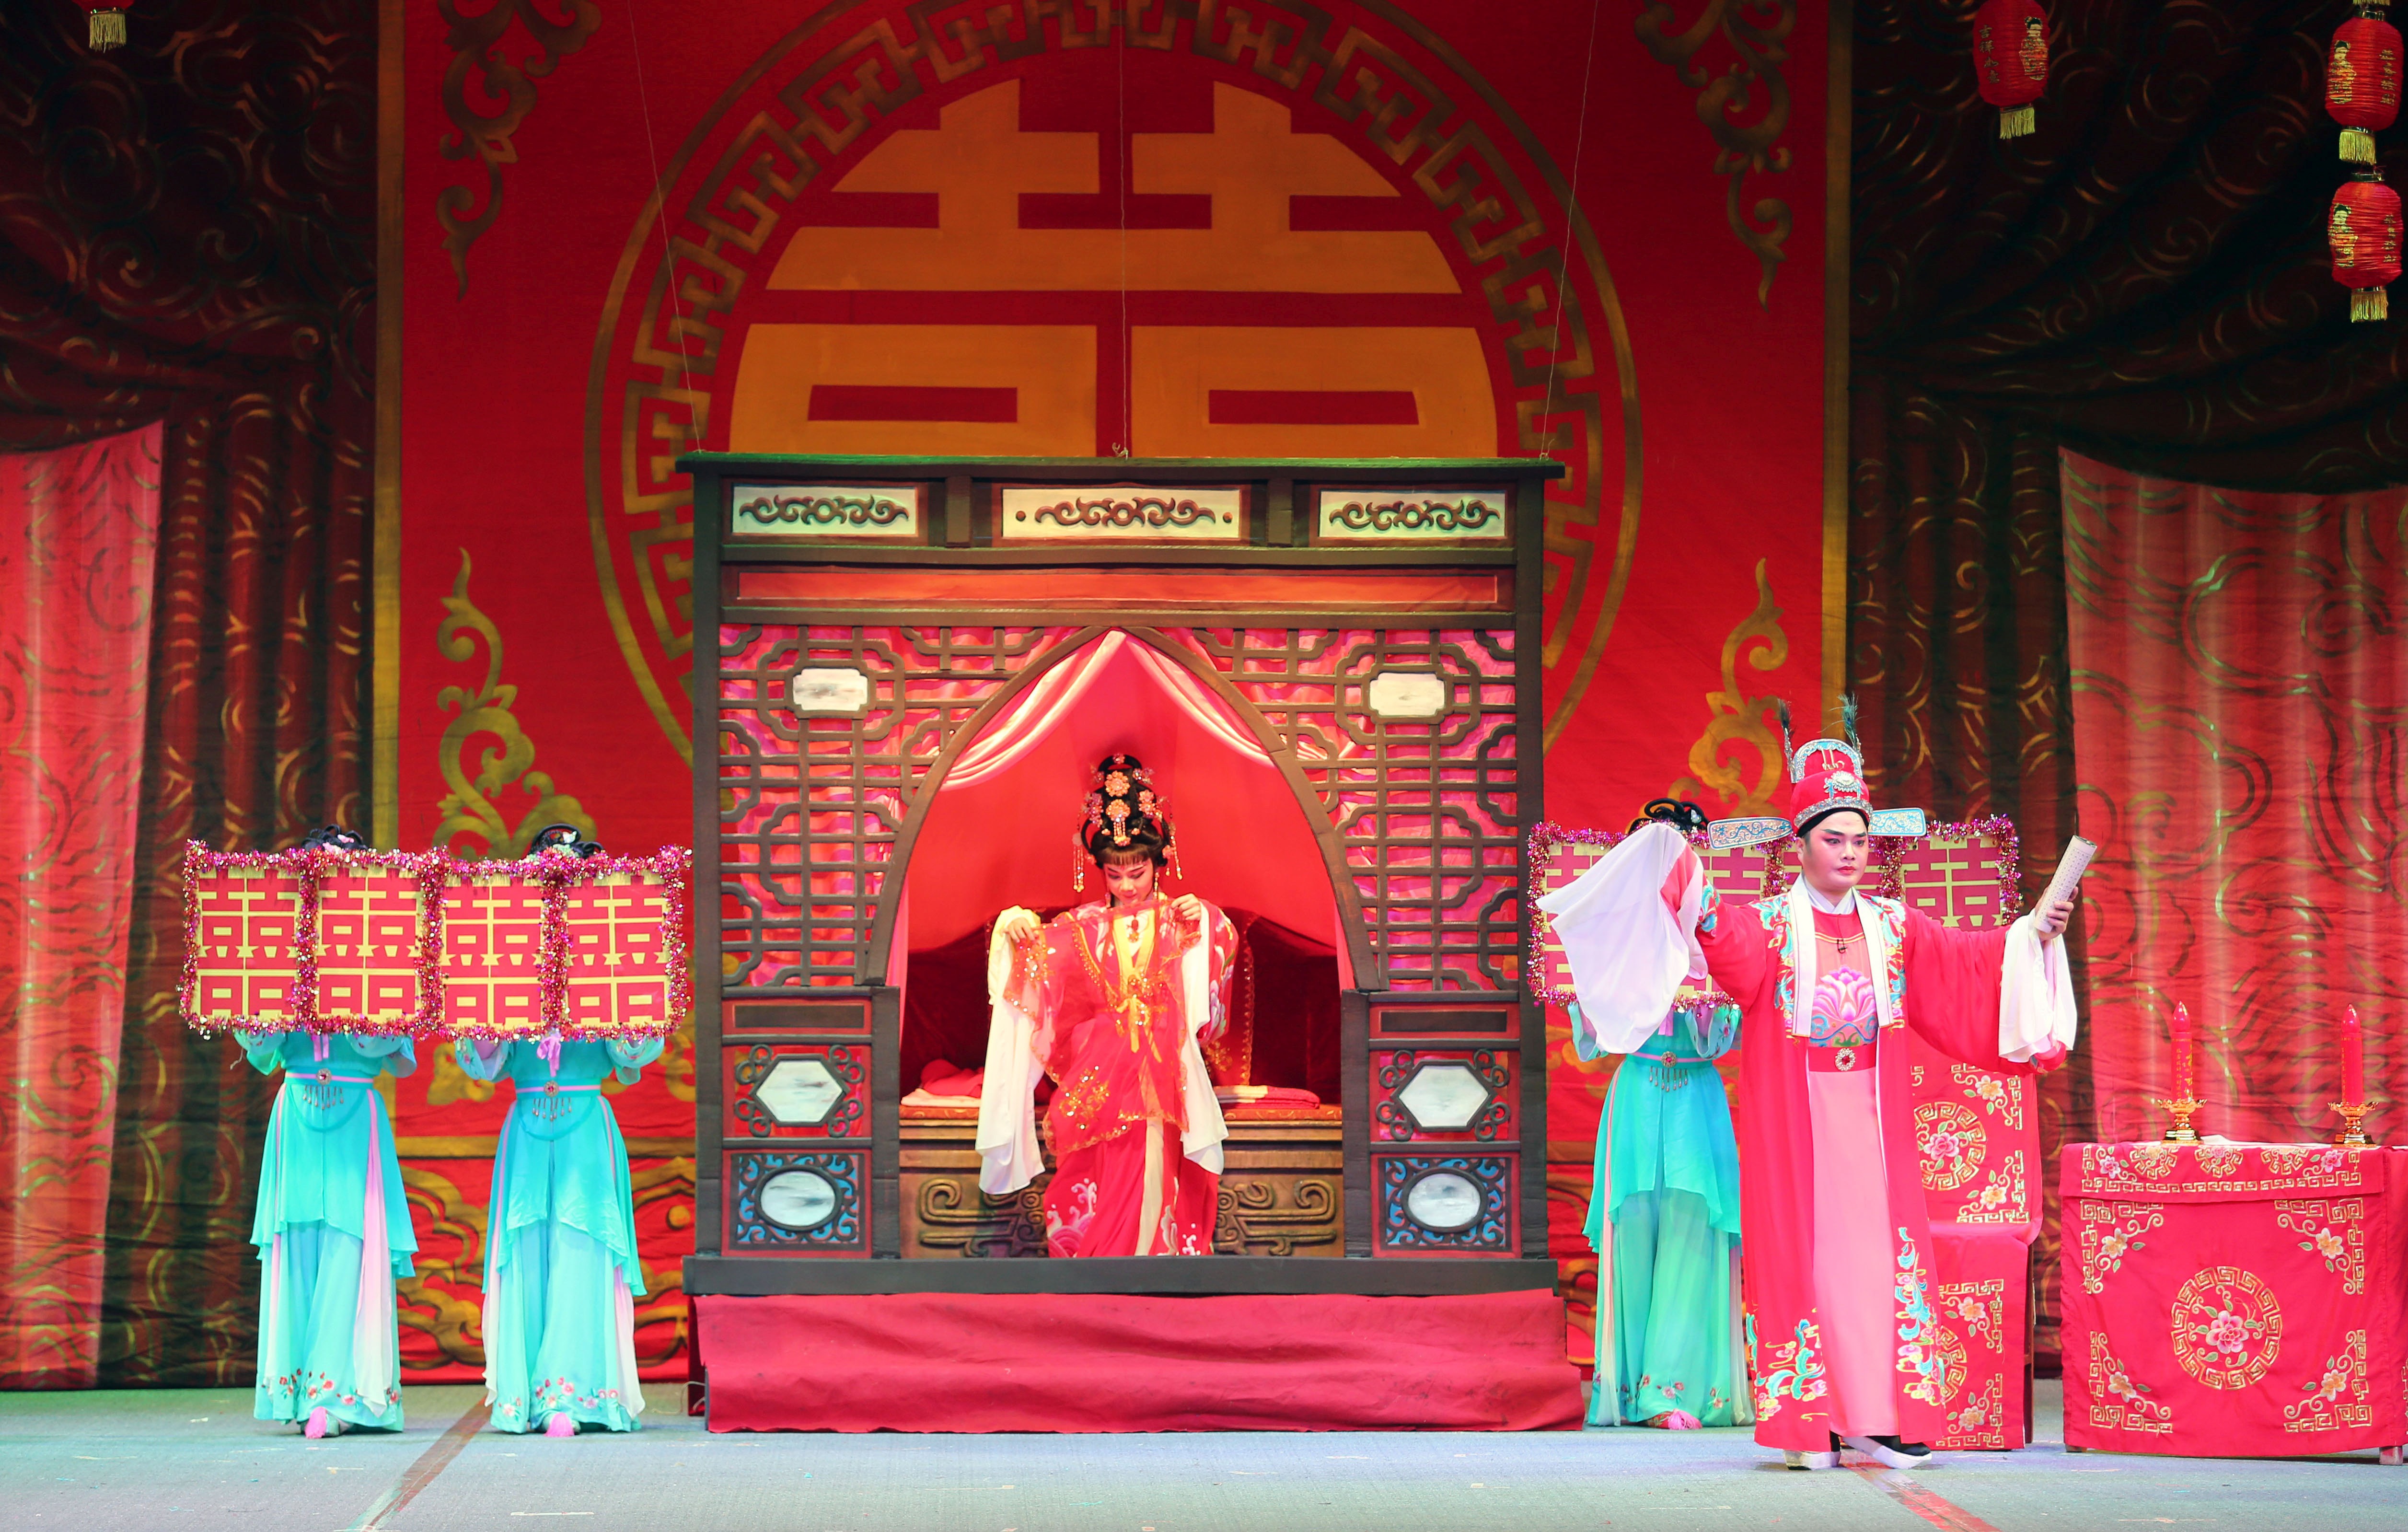 Qiong opera, performed in the local dialect, reflects the mix that makes up Hainan society.